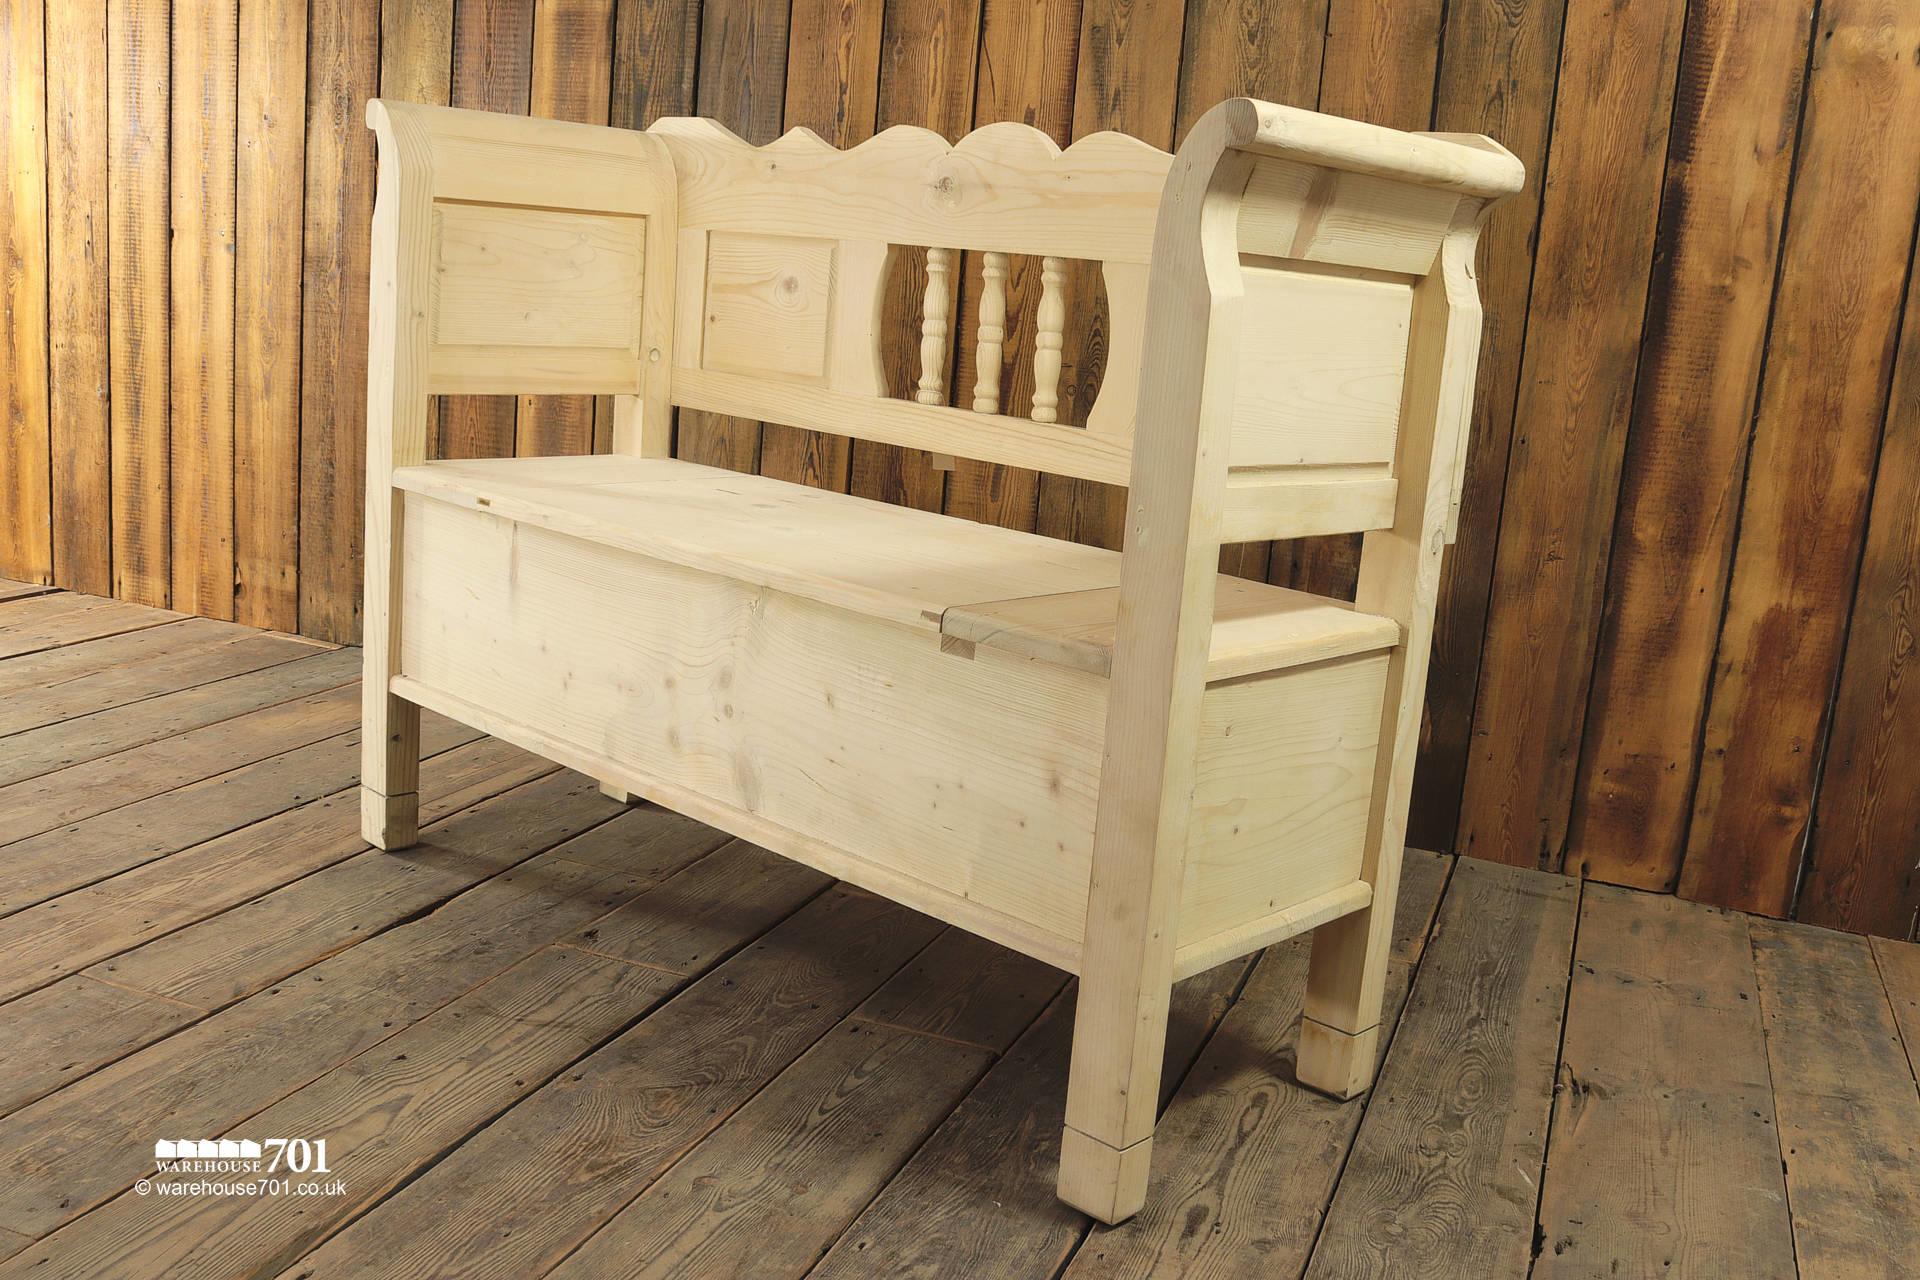 NEW unfinished Two Seat Pine Settle, Bench or Seat with Storage #2